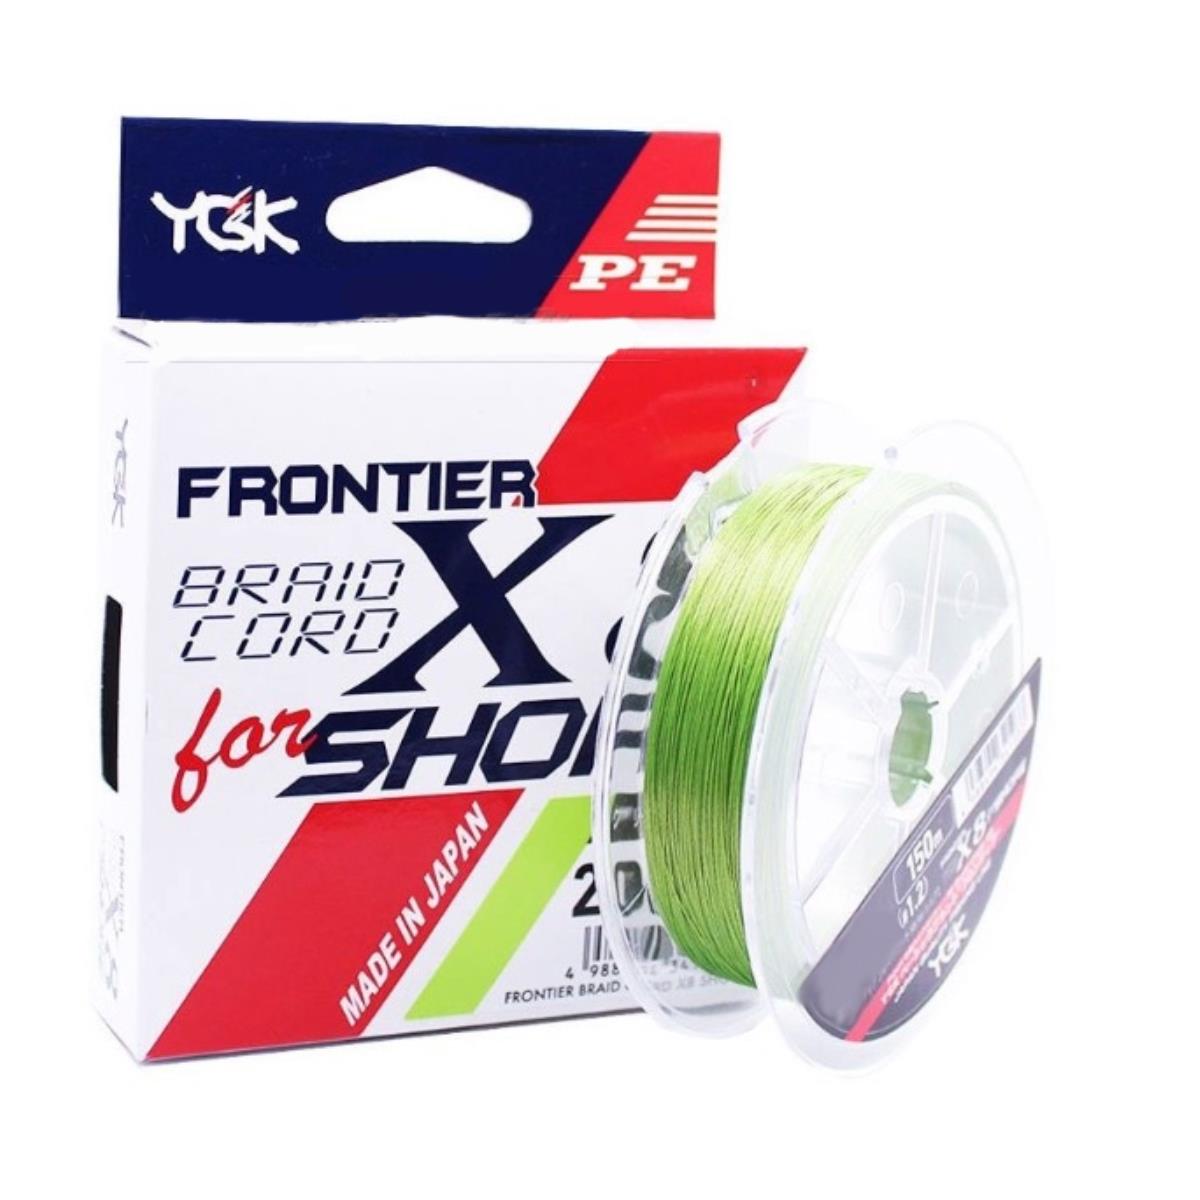 Шнур FRONTIER BRAID CORD X8 for SHORE 150 м YGK